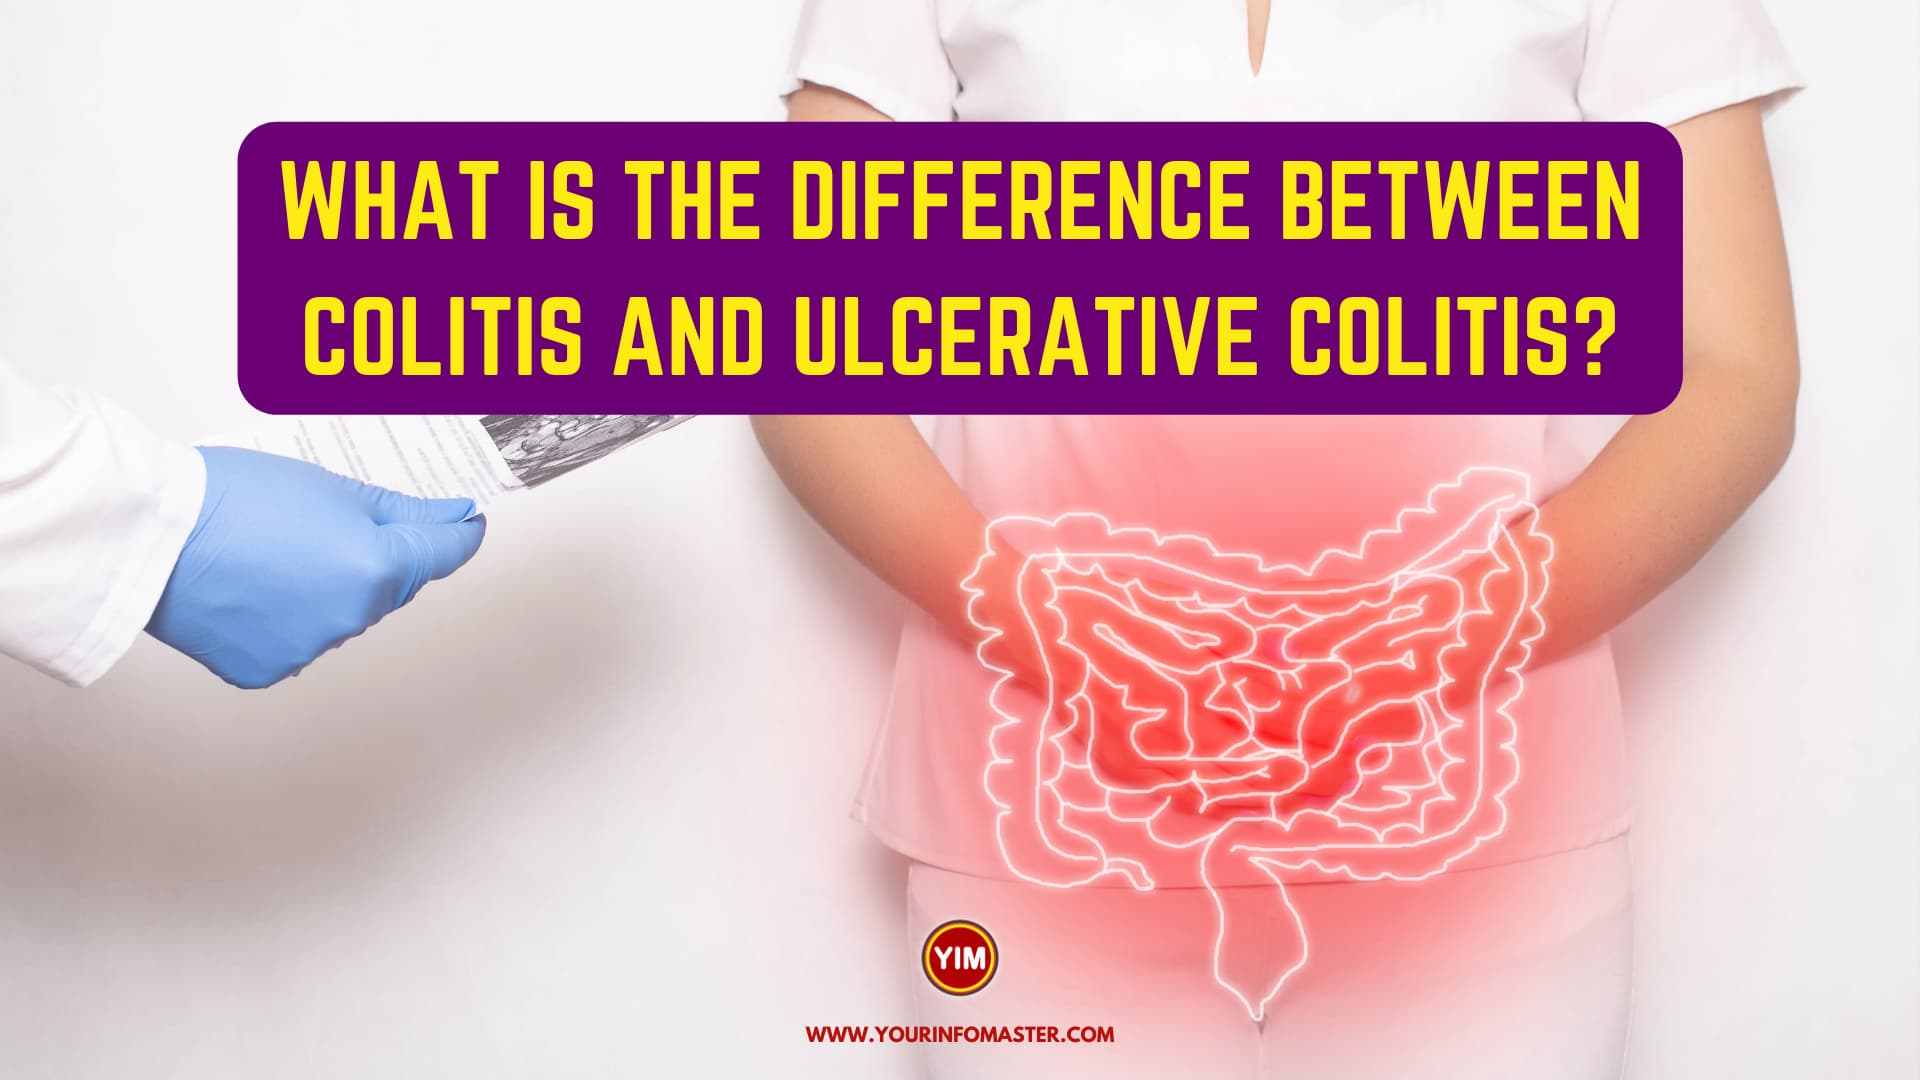 What is the difference between colitis and ulcerative colitis